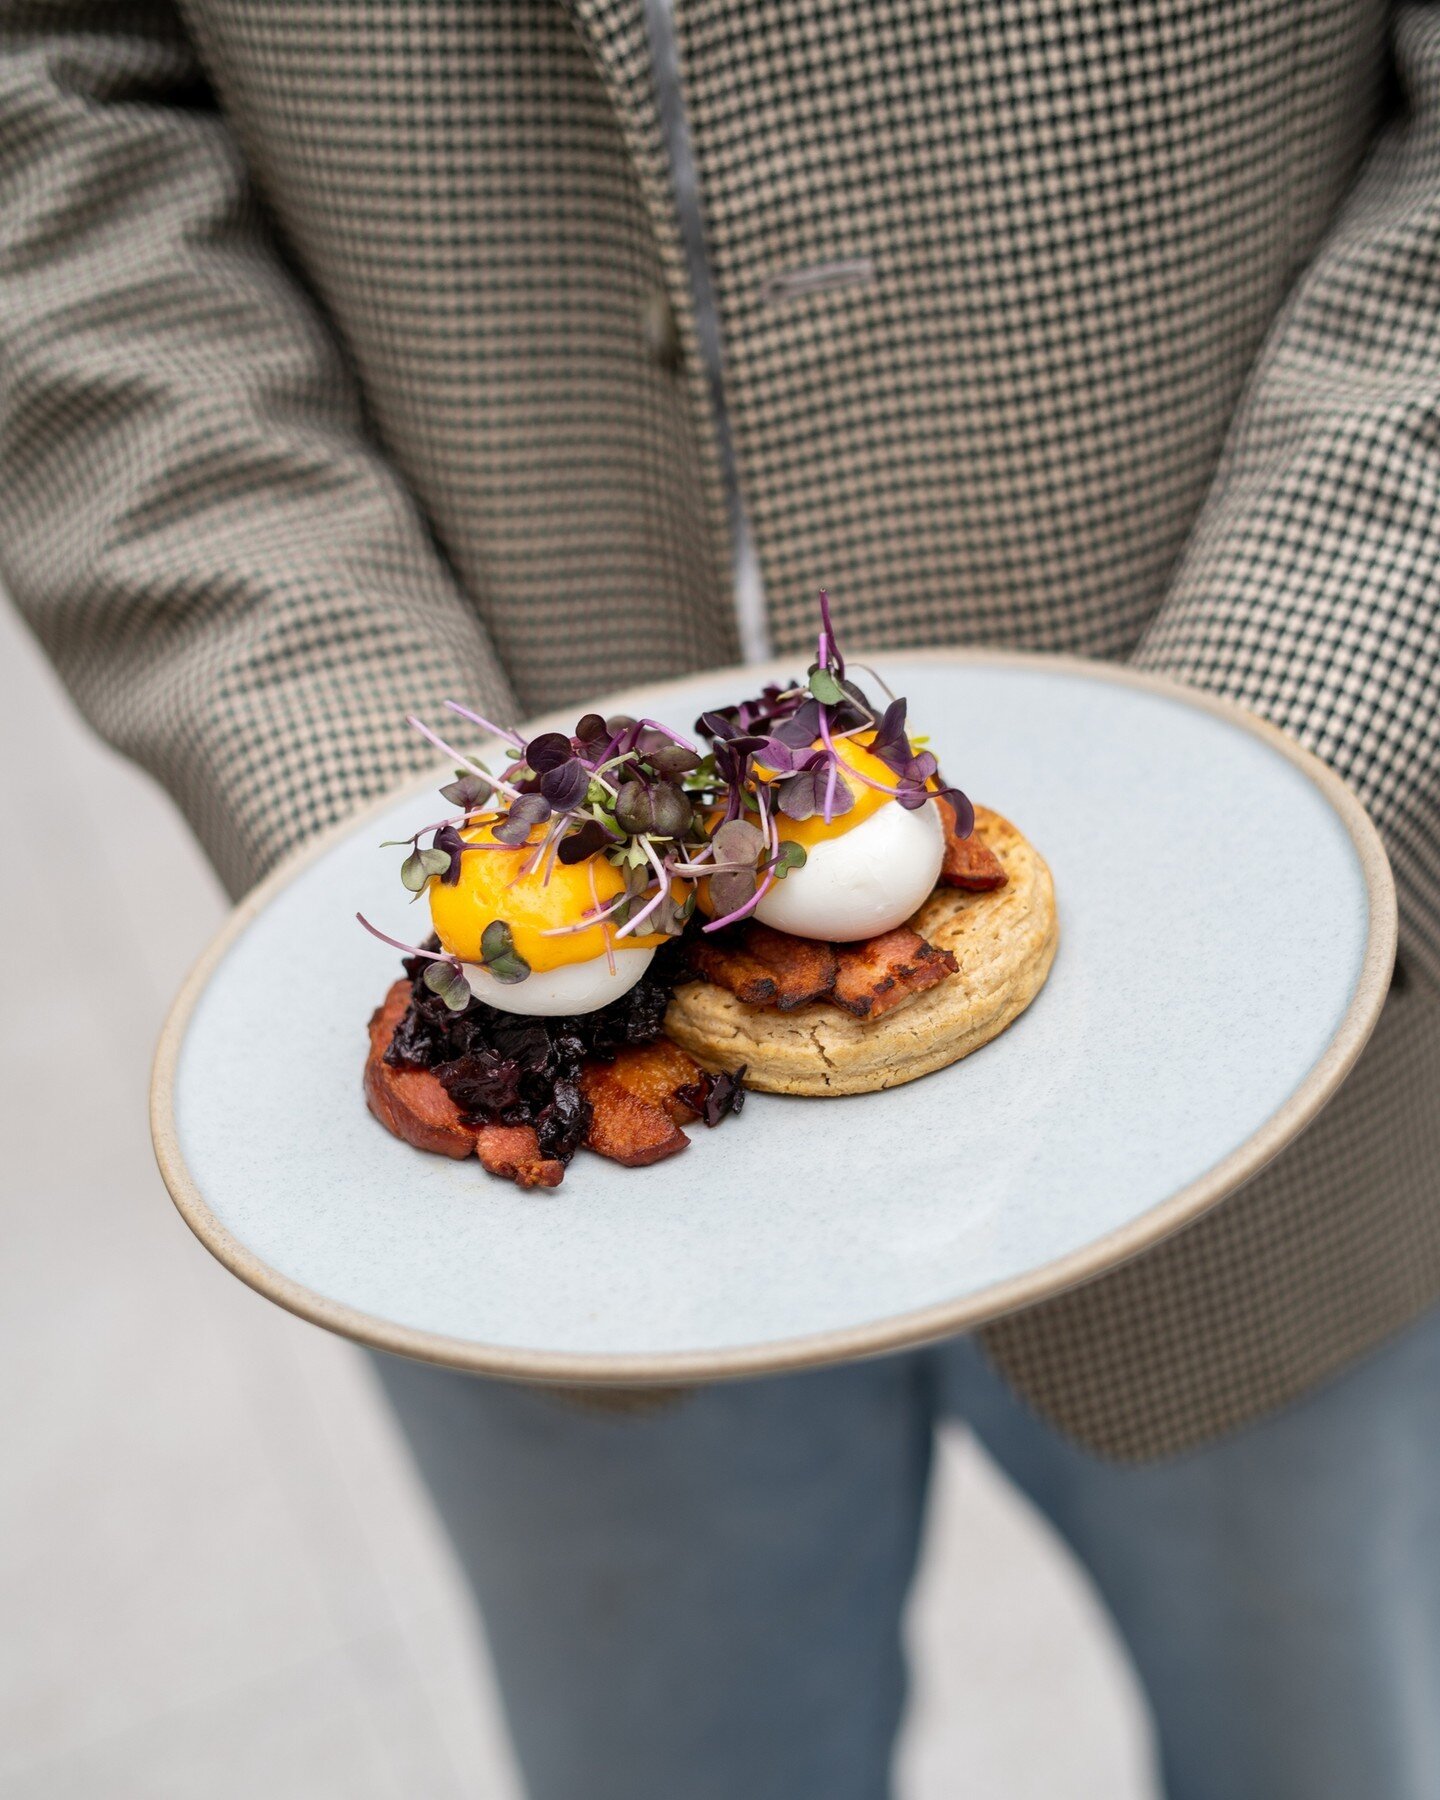 Brunch goals: Porgies&rsquo; Eggs Benny. Nuff said. ⁠
Step right in and enjoy our delectable offerings, including this one. ✨⁠
⁠
[Open 7 am -  3 pm.]⁠